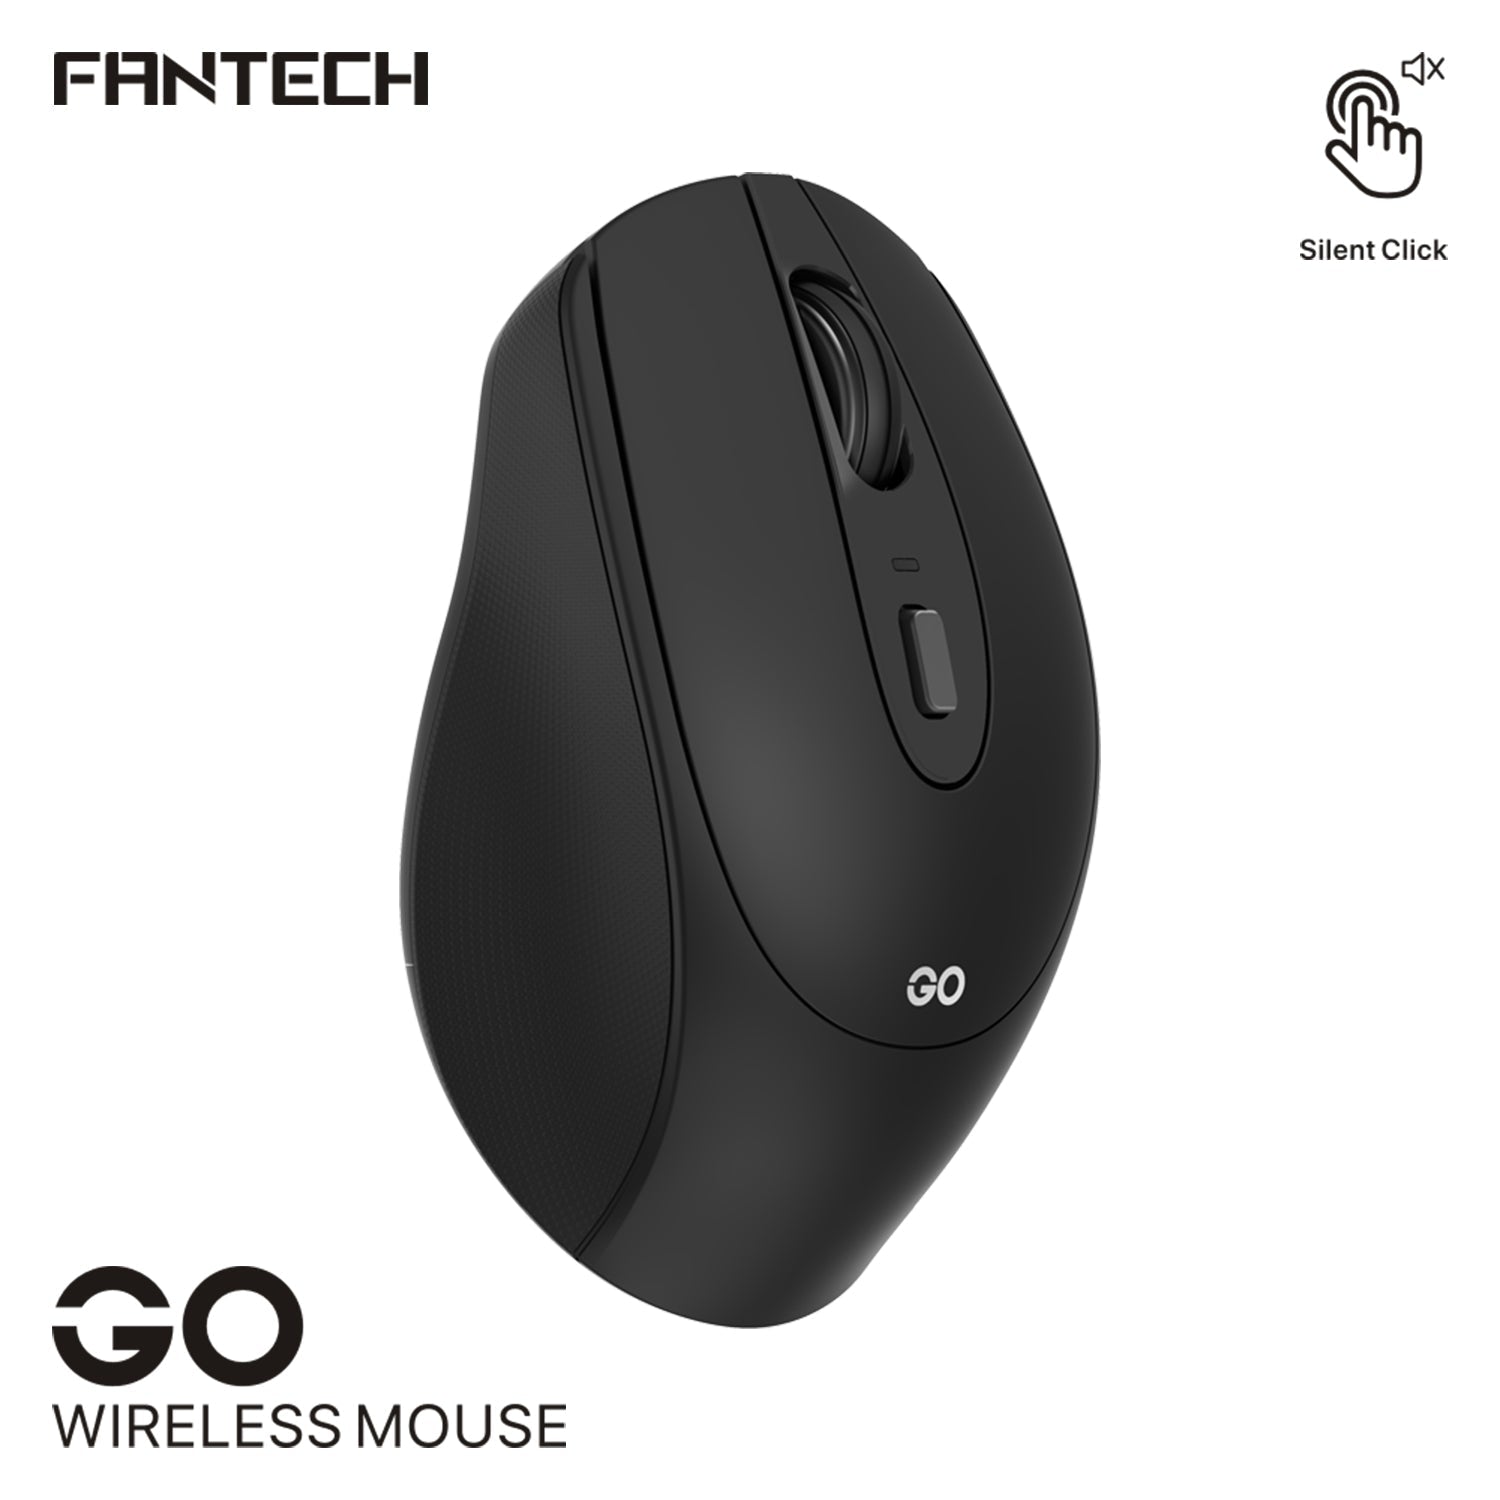 Fantech W191 Wireless Mouse with Silent Click - Fantech Jordan | Gaming Accessories Store 